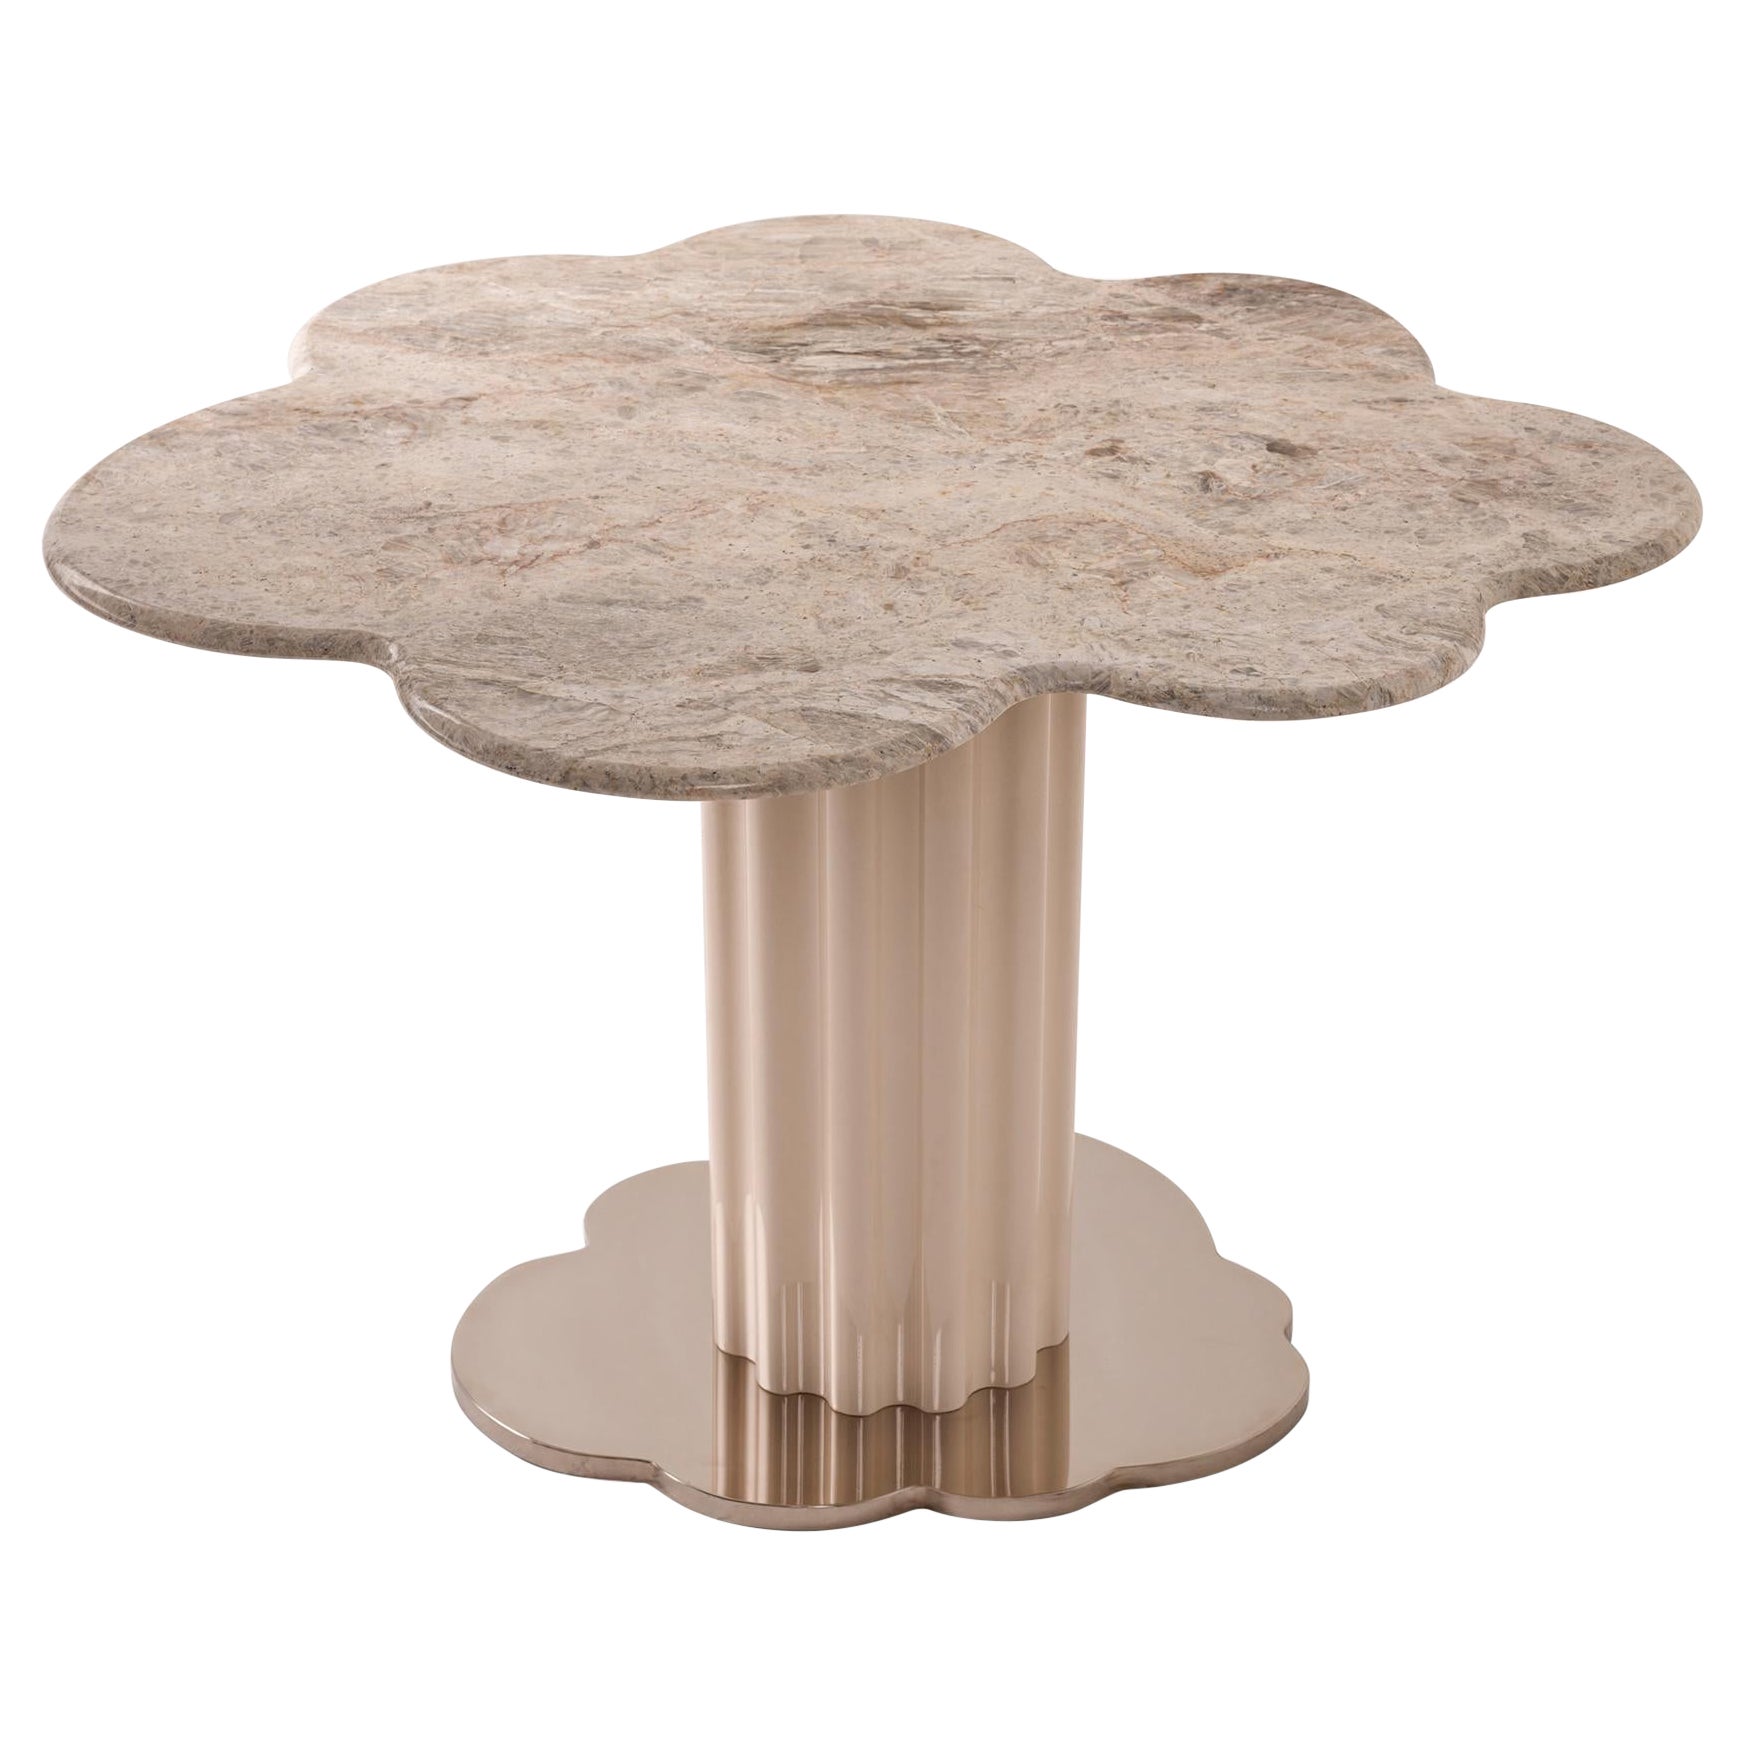 Sulpap Cream Colored Marble Dining Table with Polished Chrome Base For Sale